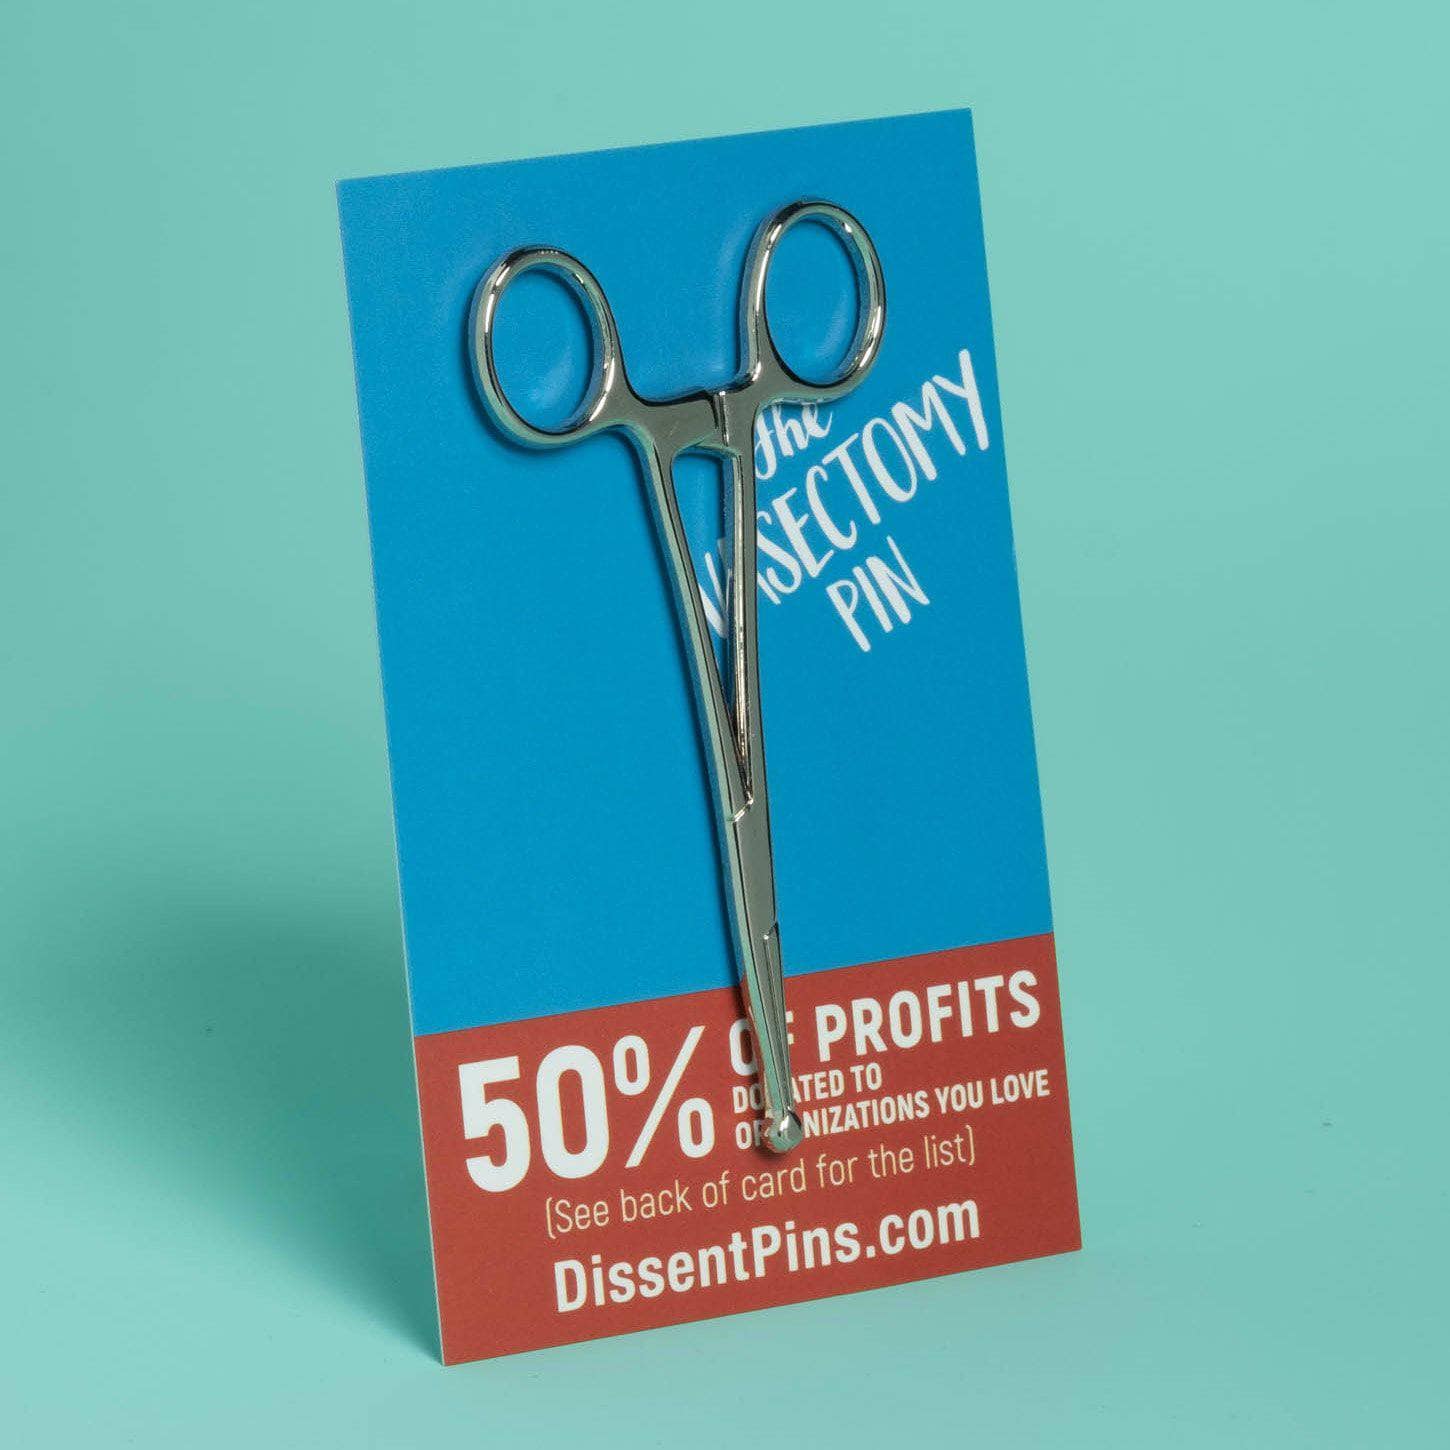 The Vasectomy Pin